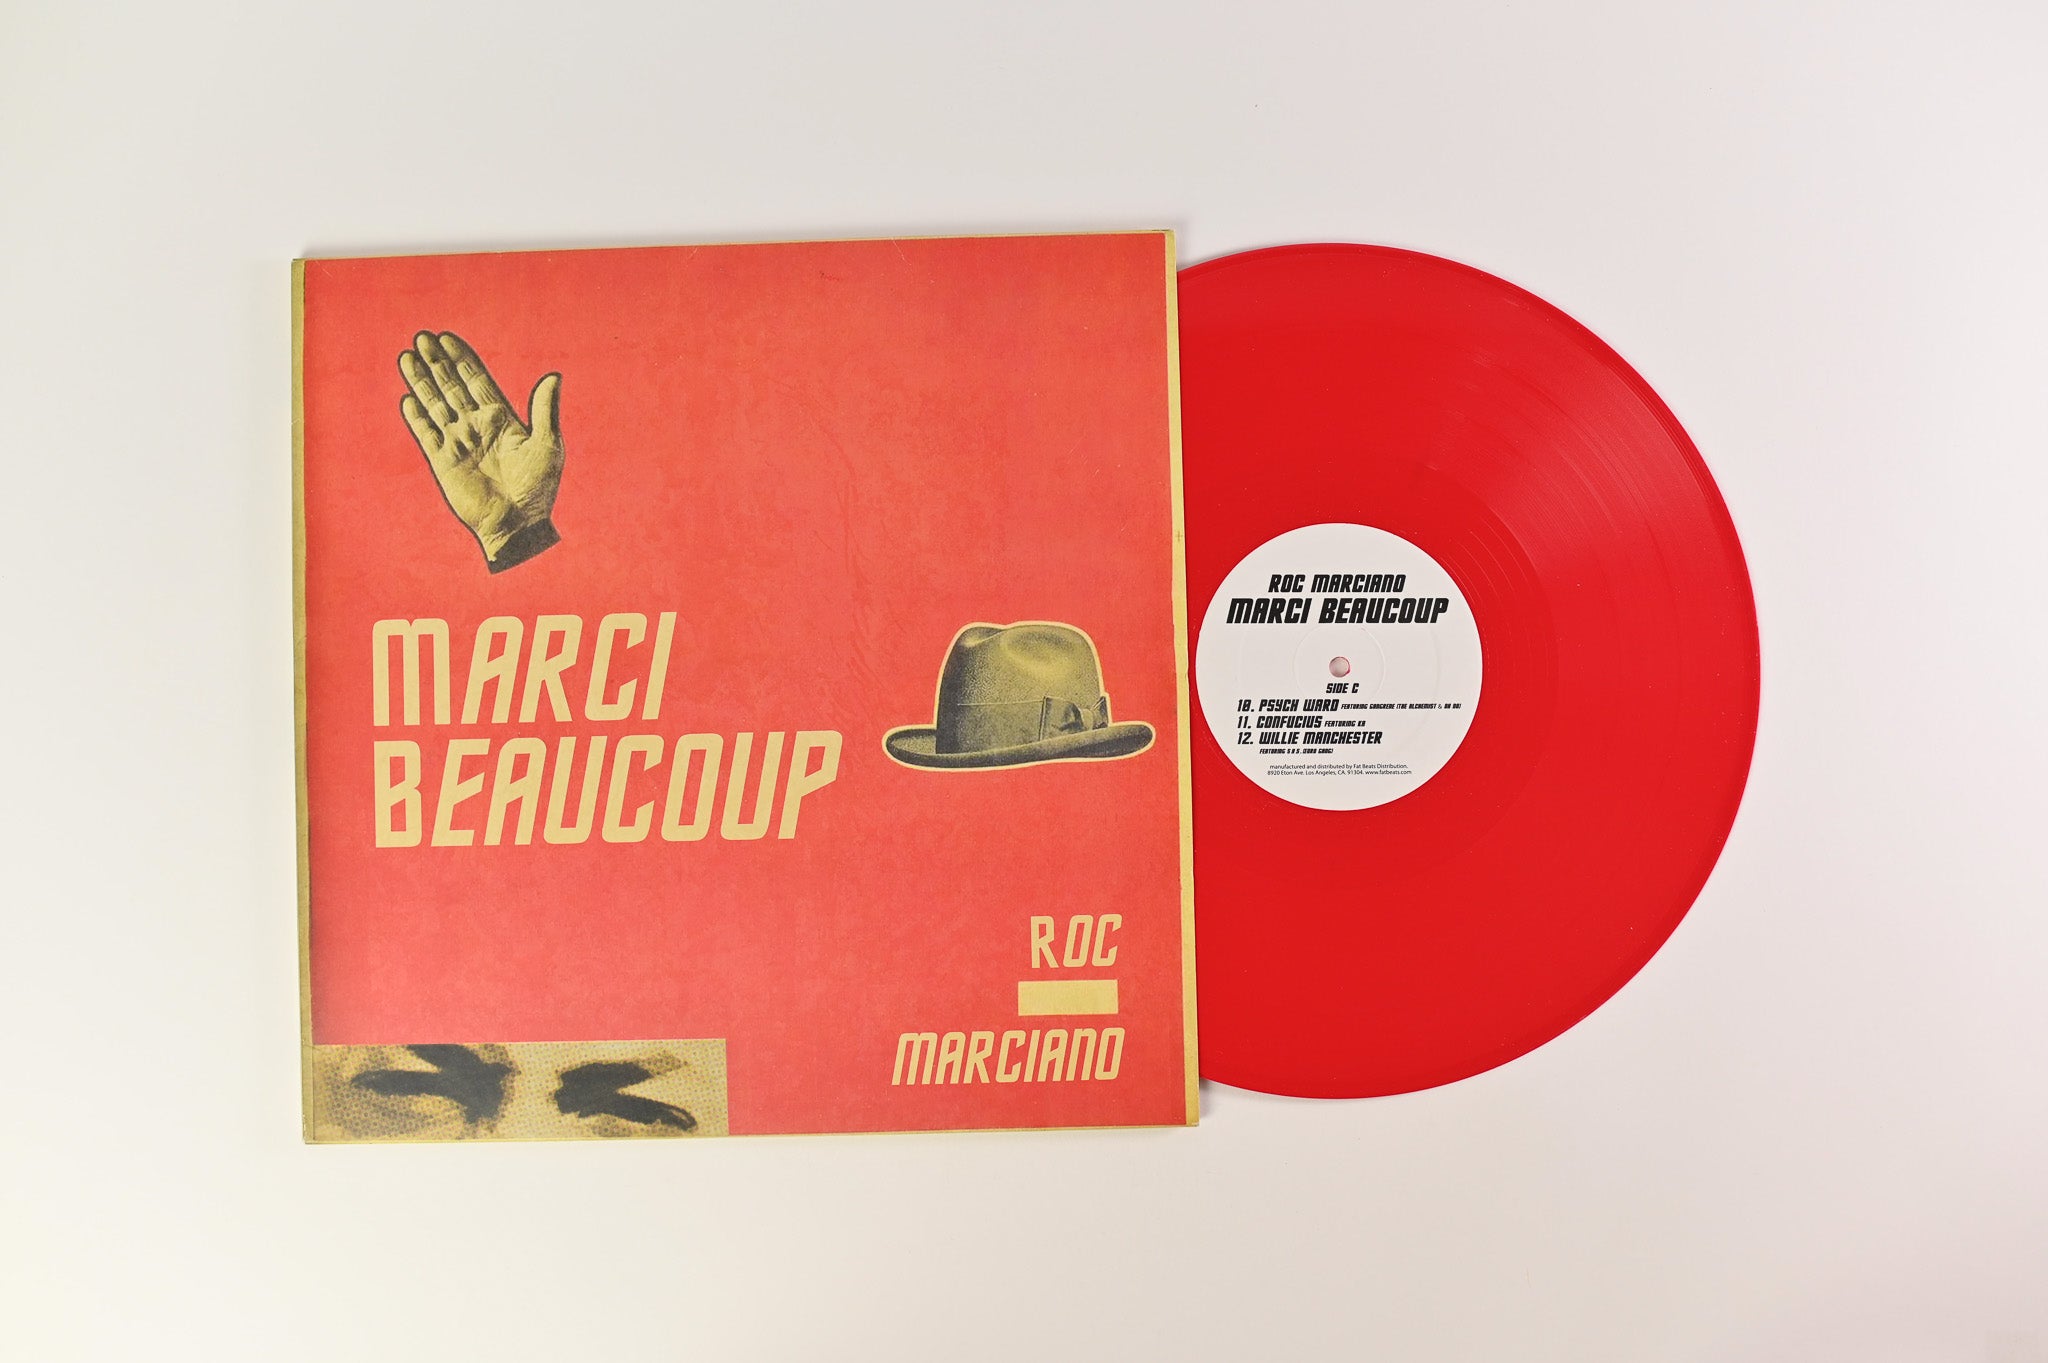 Roc Marciano - Marci Beaucoup on Man Bites Dog Limited Red